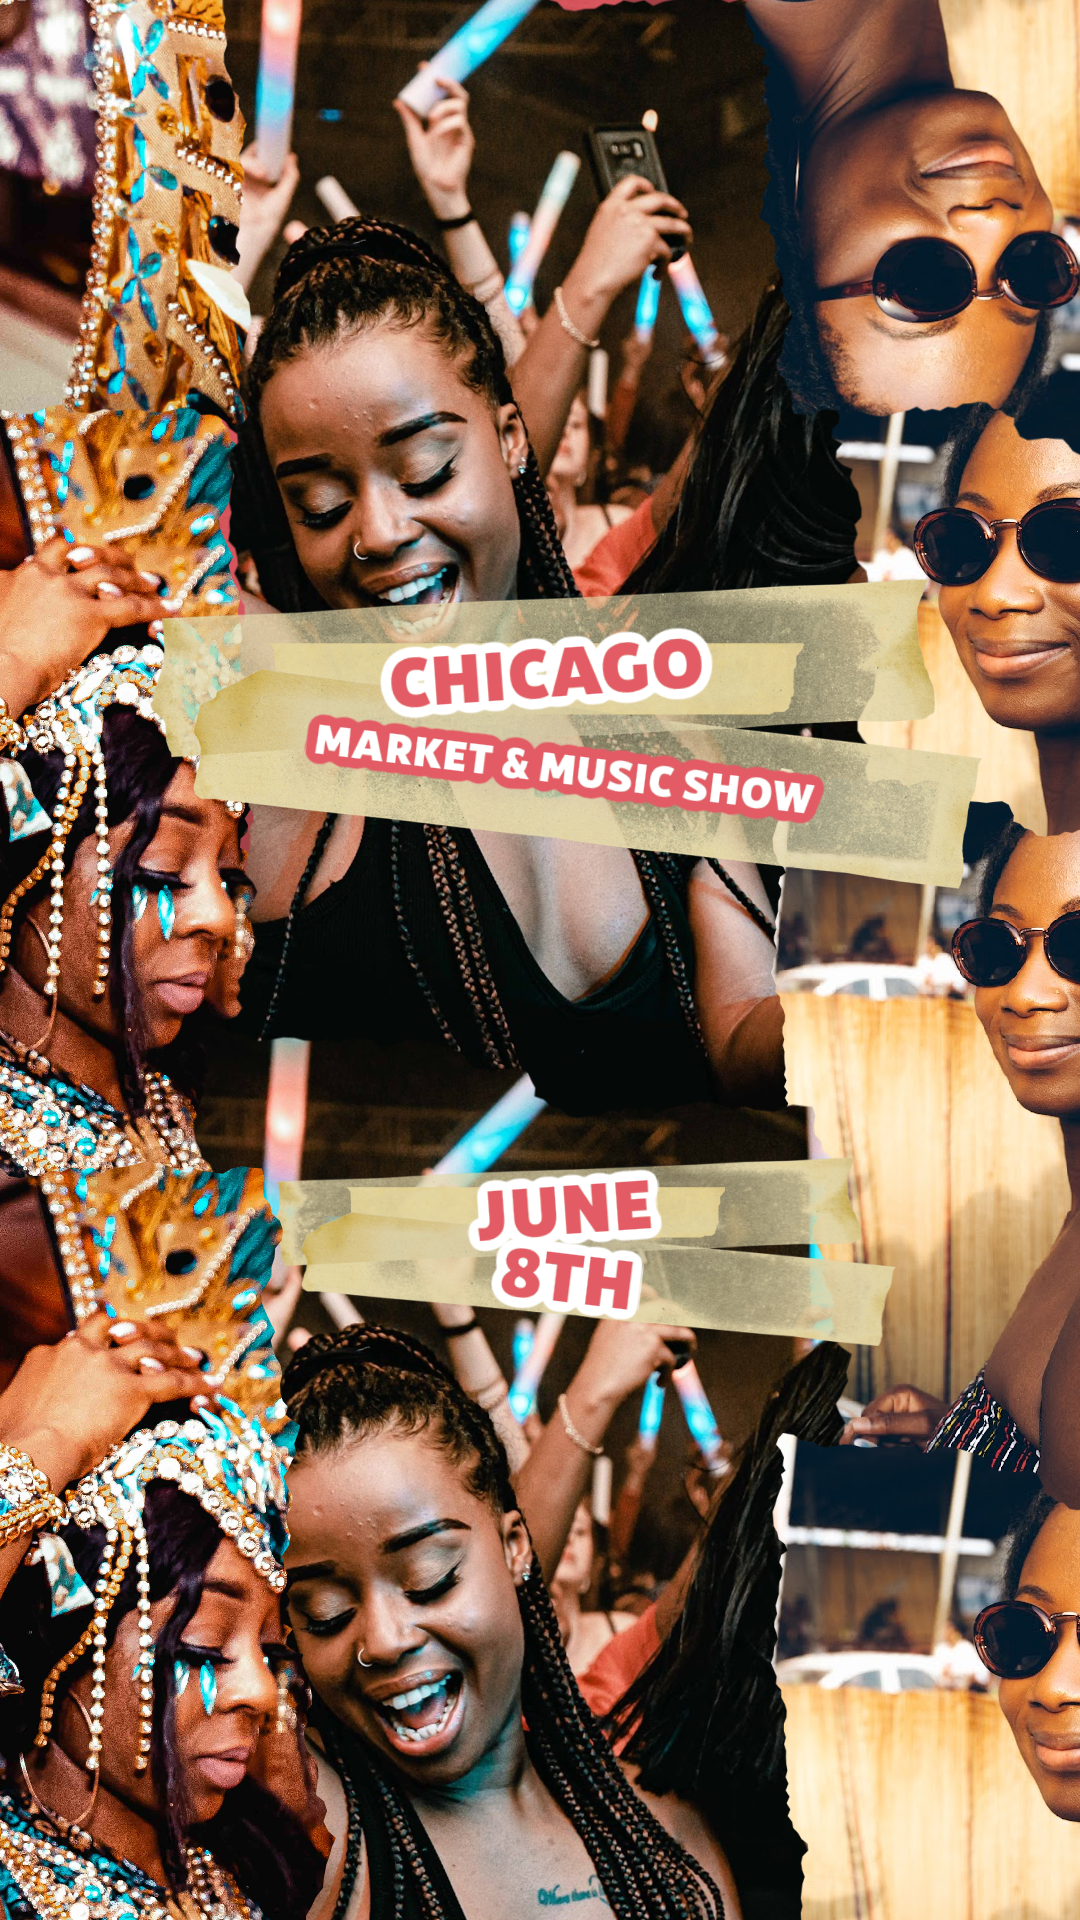 AfroSocaLove : CHICAGO Party & BlackOwned Market (Feat Maga Stories & More) - Afro Soca Love Supply